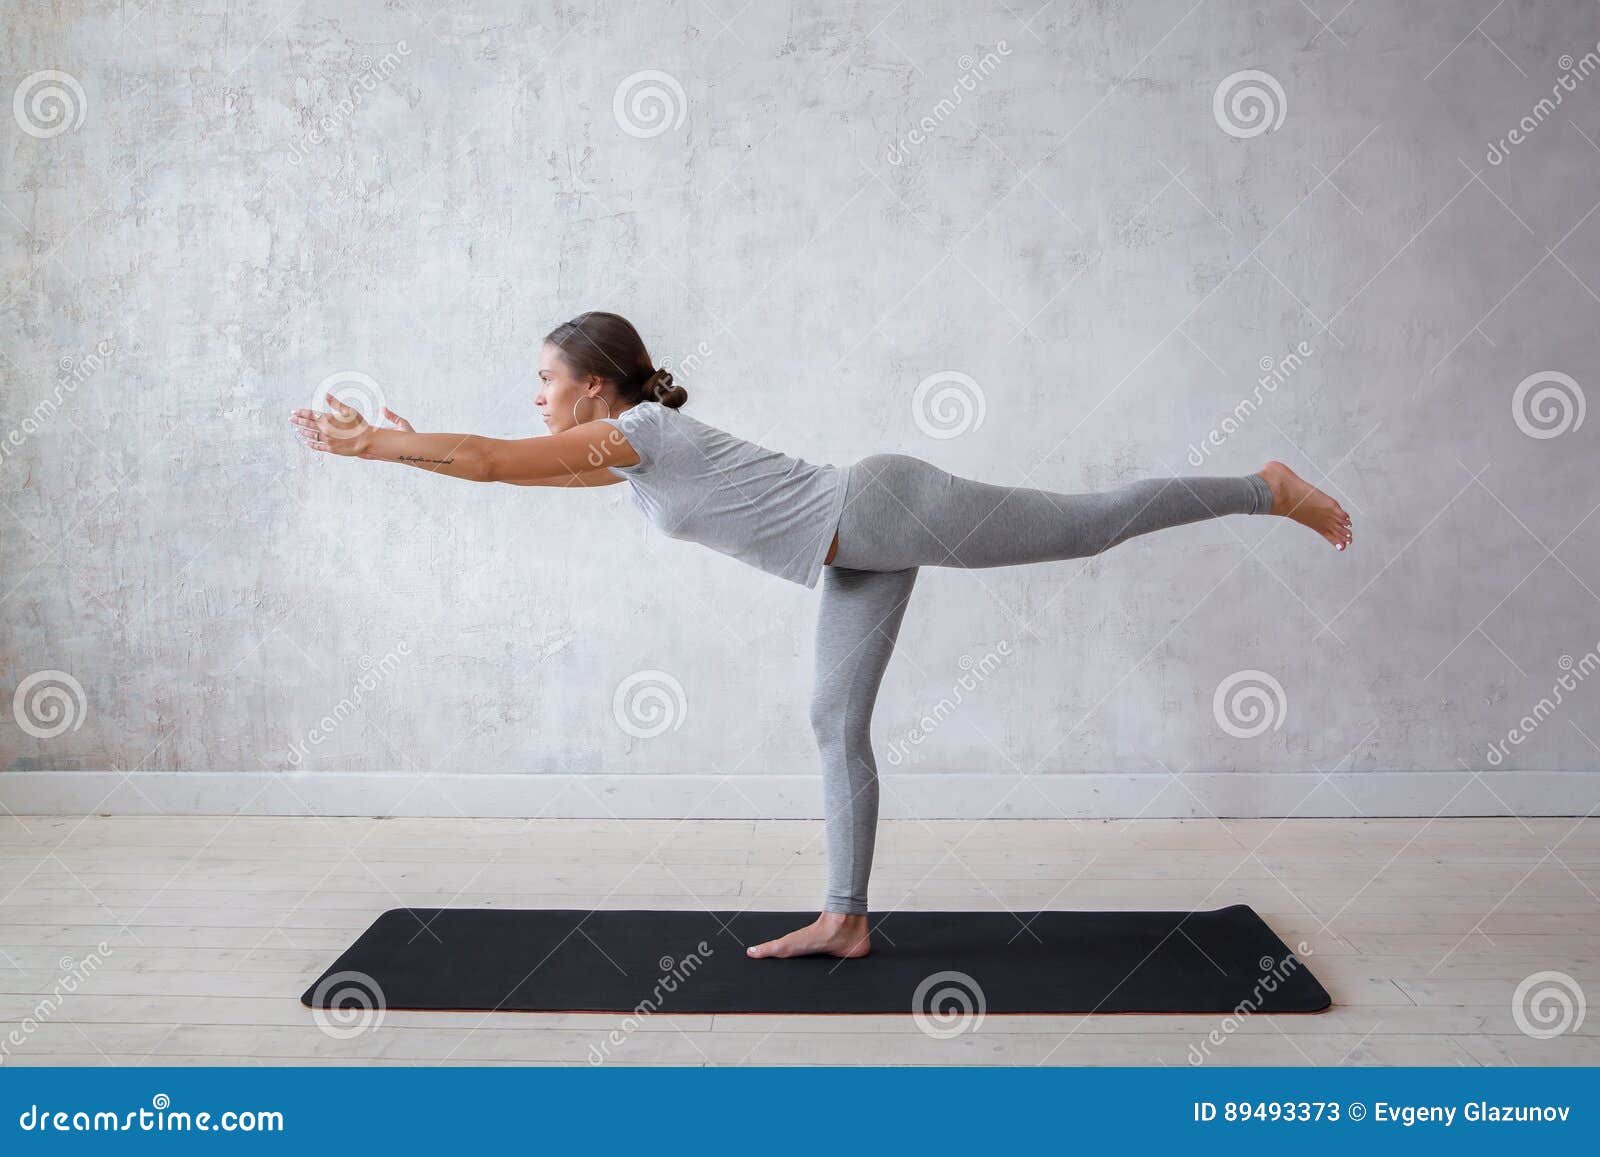 13,608 Yoga Poses Images Stock Photos - Free & Royalty-Free Stock Photos  from Dreamstime